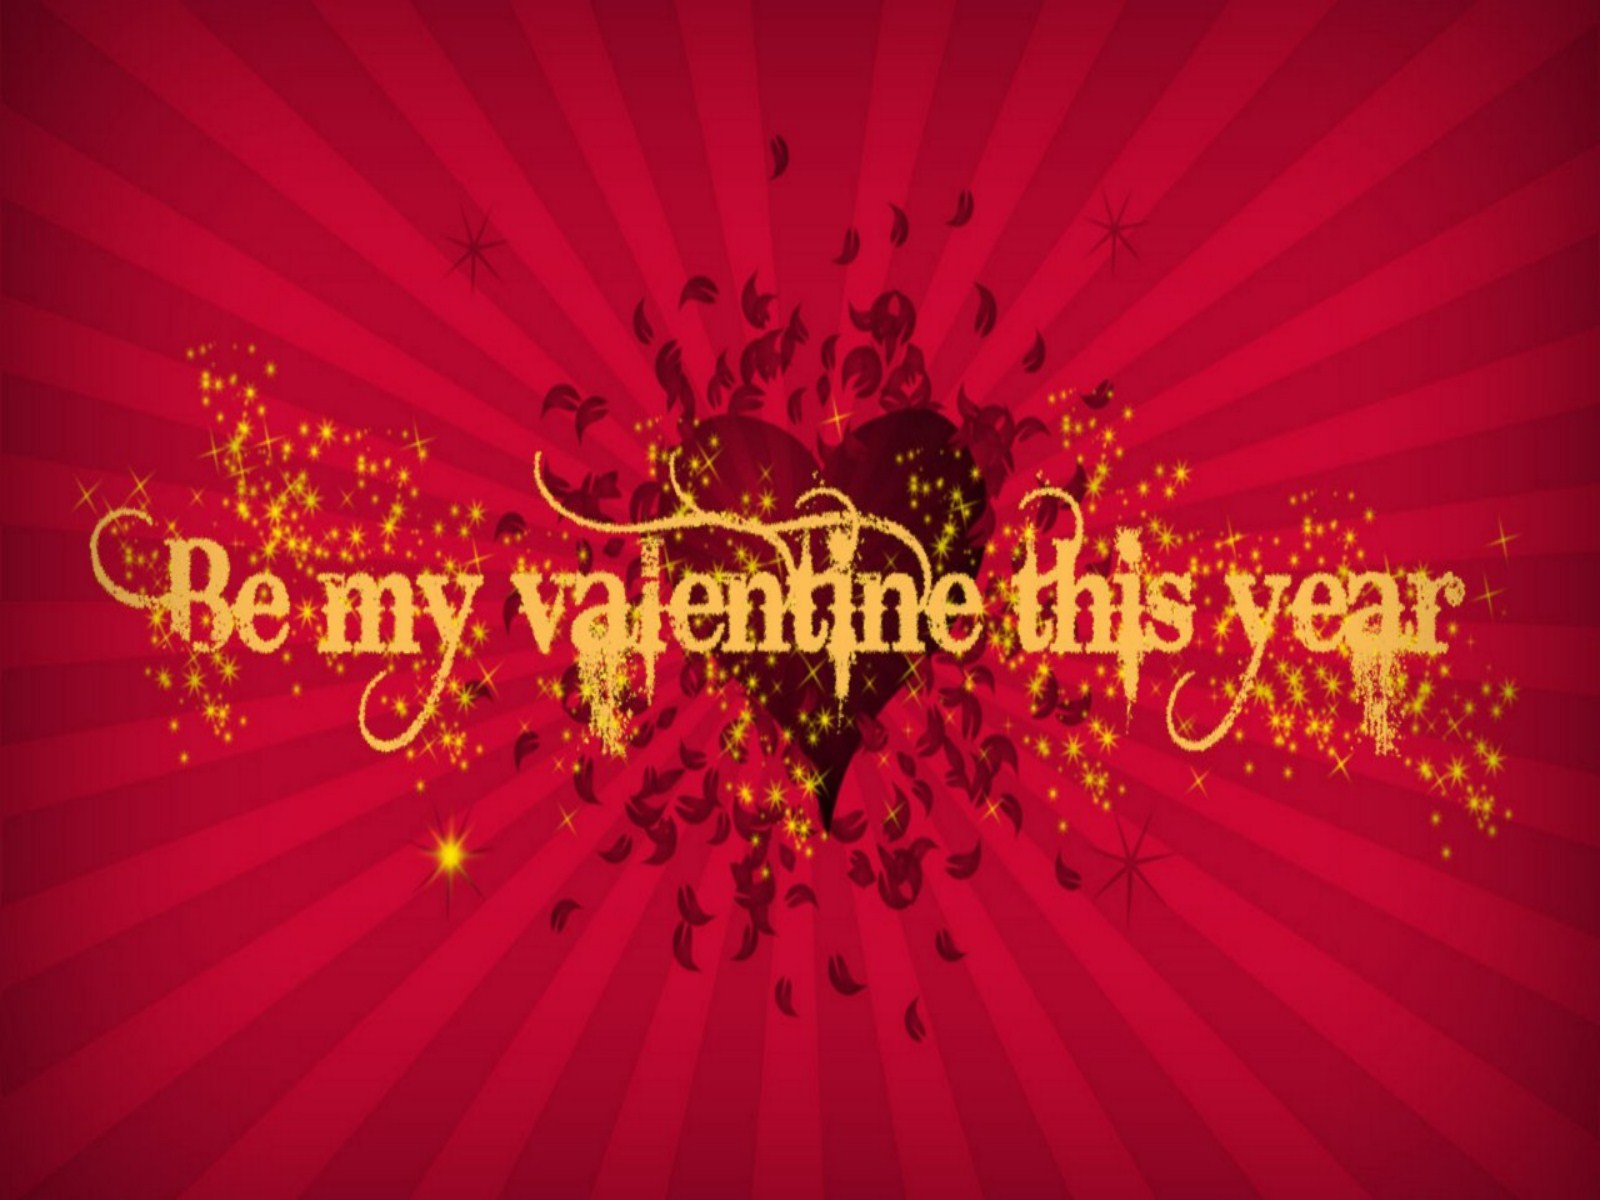 Displaying Image For Be My Valentine Wallpaper